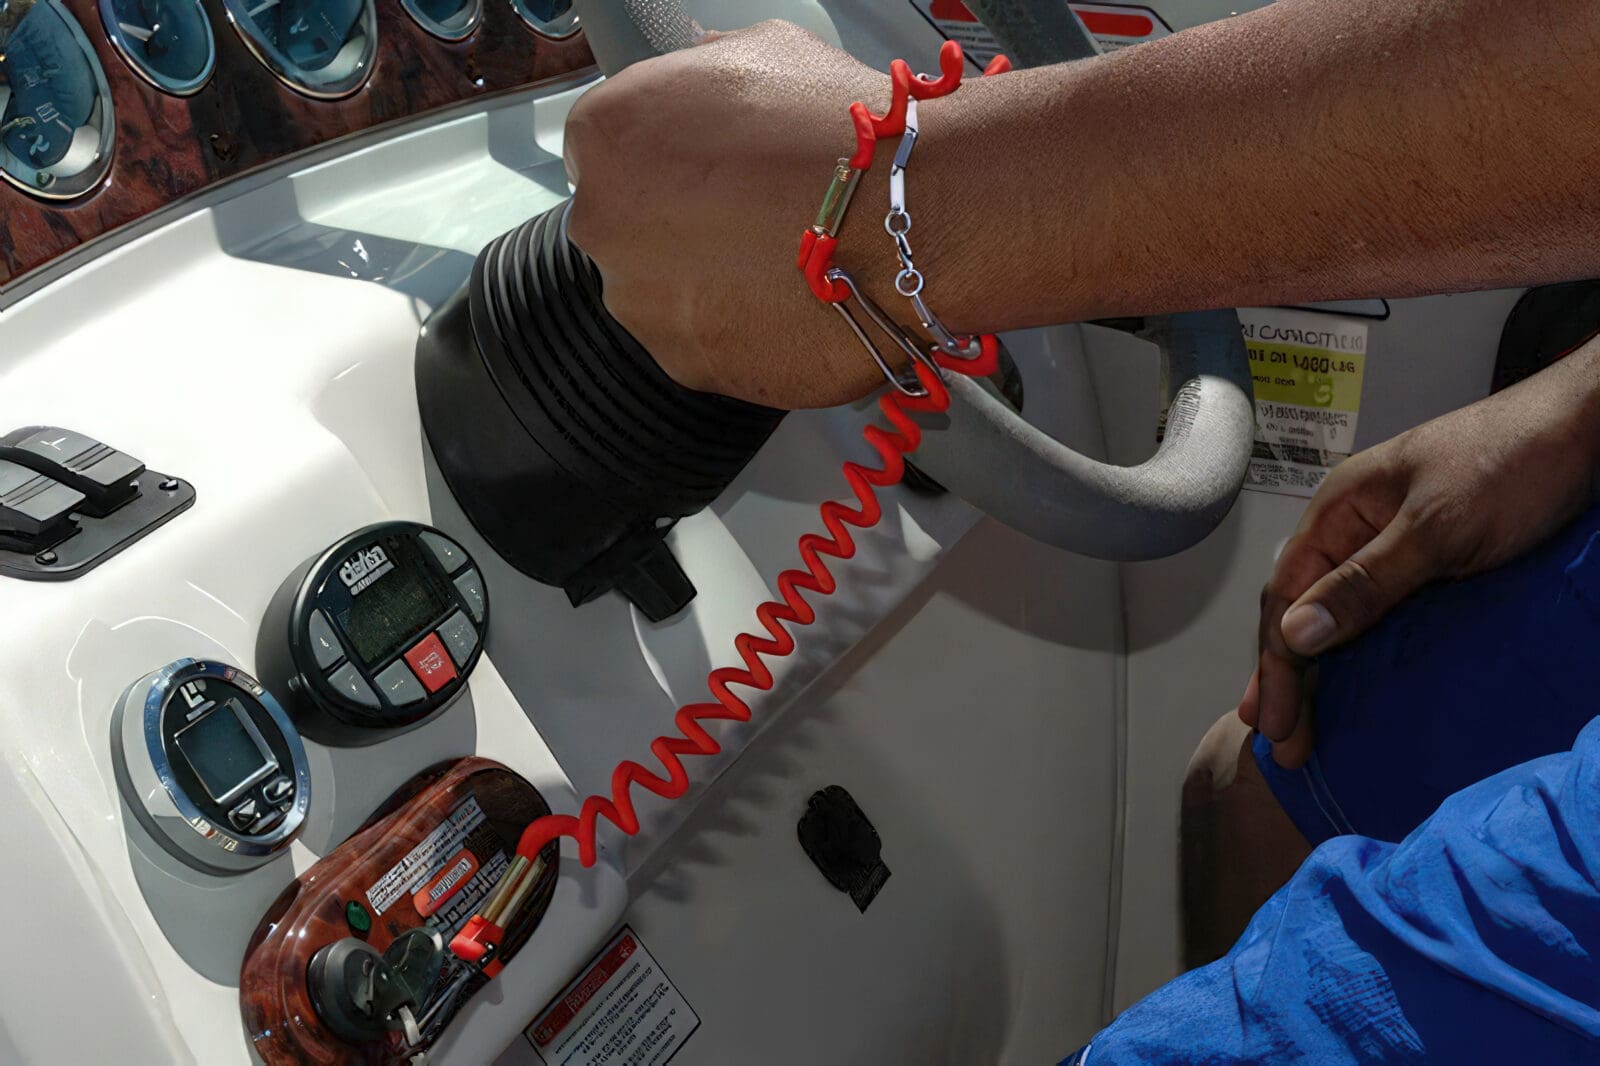 ecos-device-attached-to-wrist-on-boat-driver-new-lawgiga-cropped